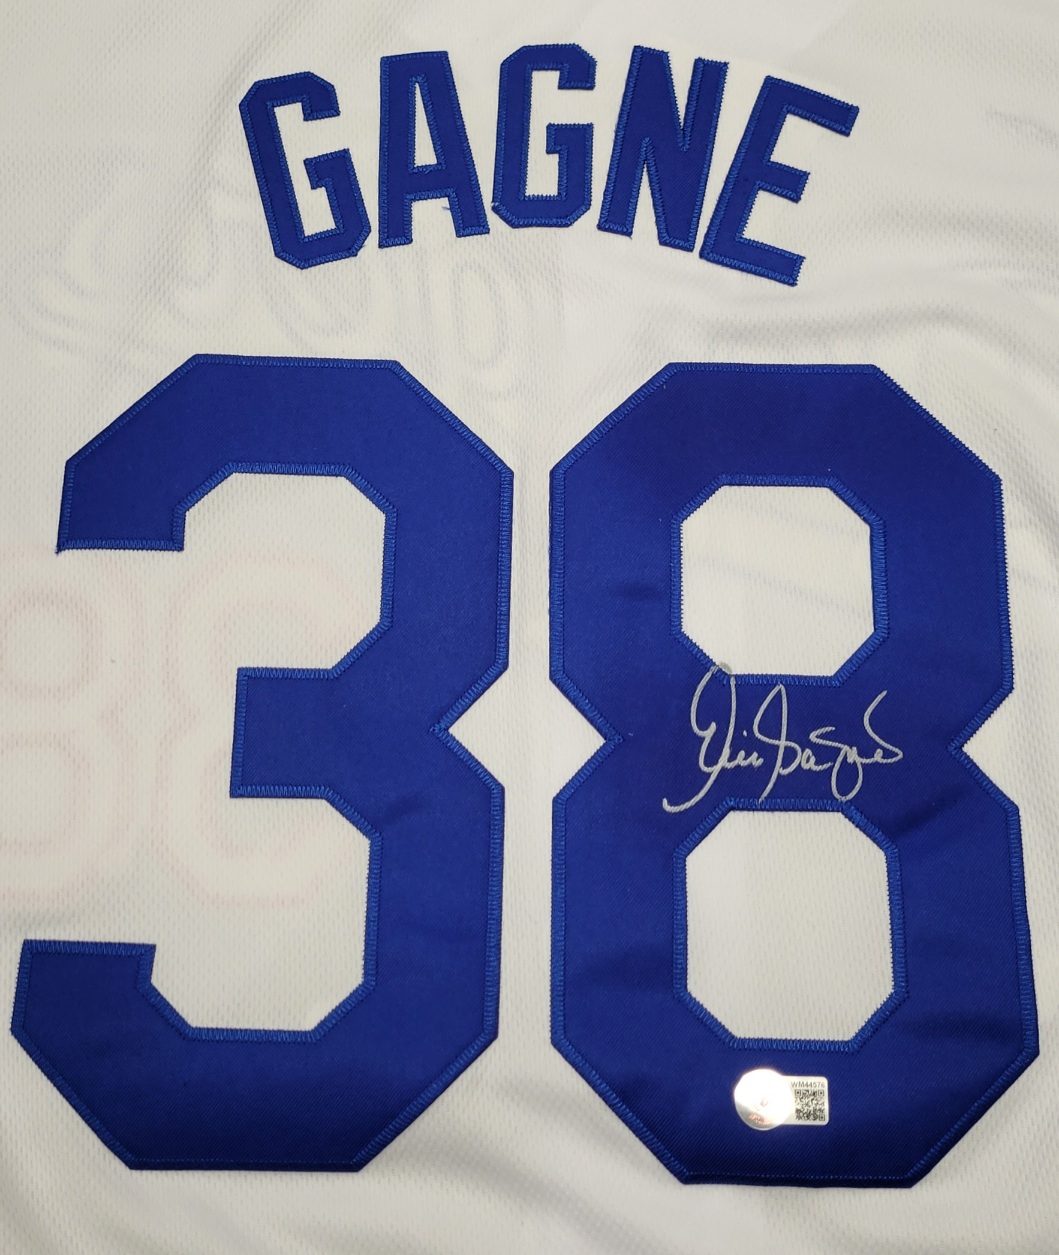 Signed Eric Gagne Photo - WORLD SERIES 07 8x10 - Autographed MLB